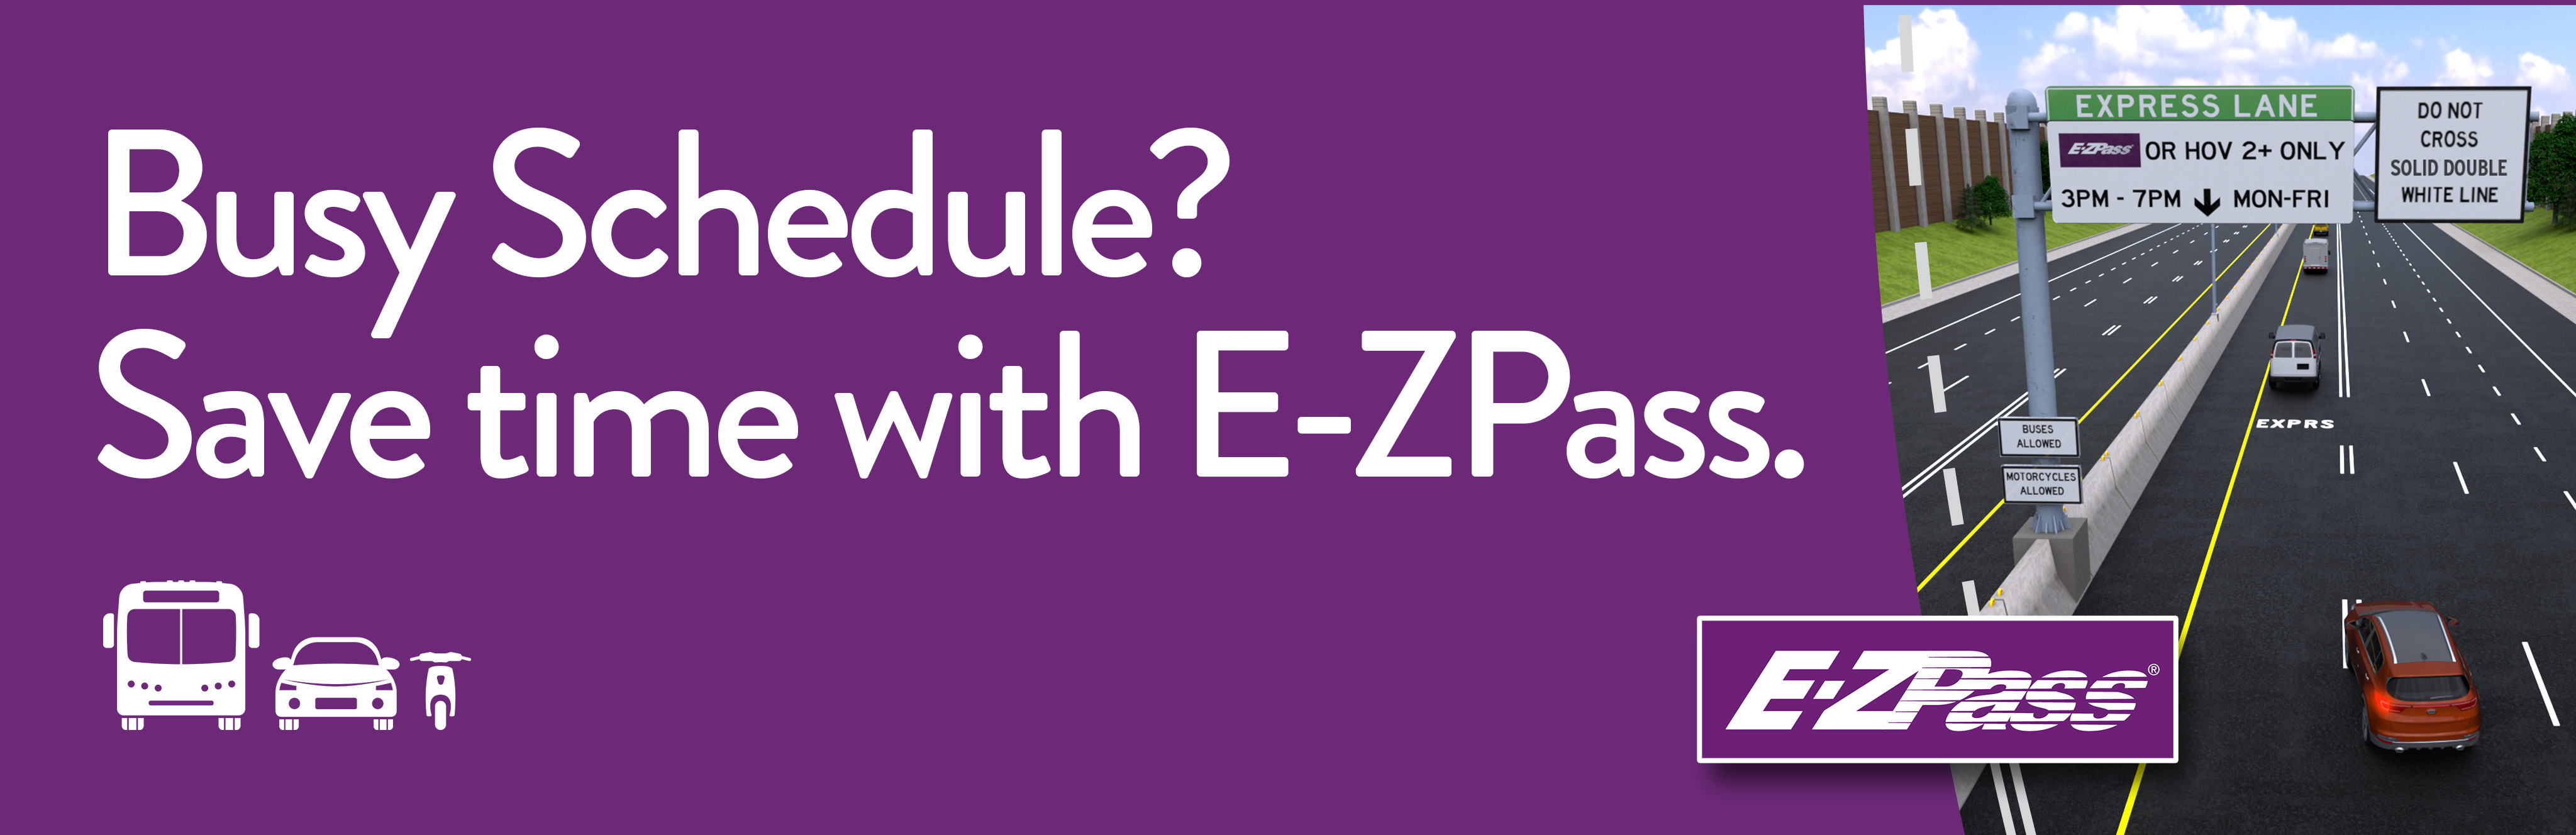 E-ZPass: Busy schedule? Save time with E-ZPass.